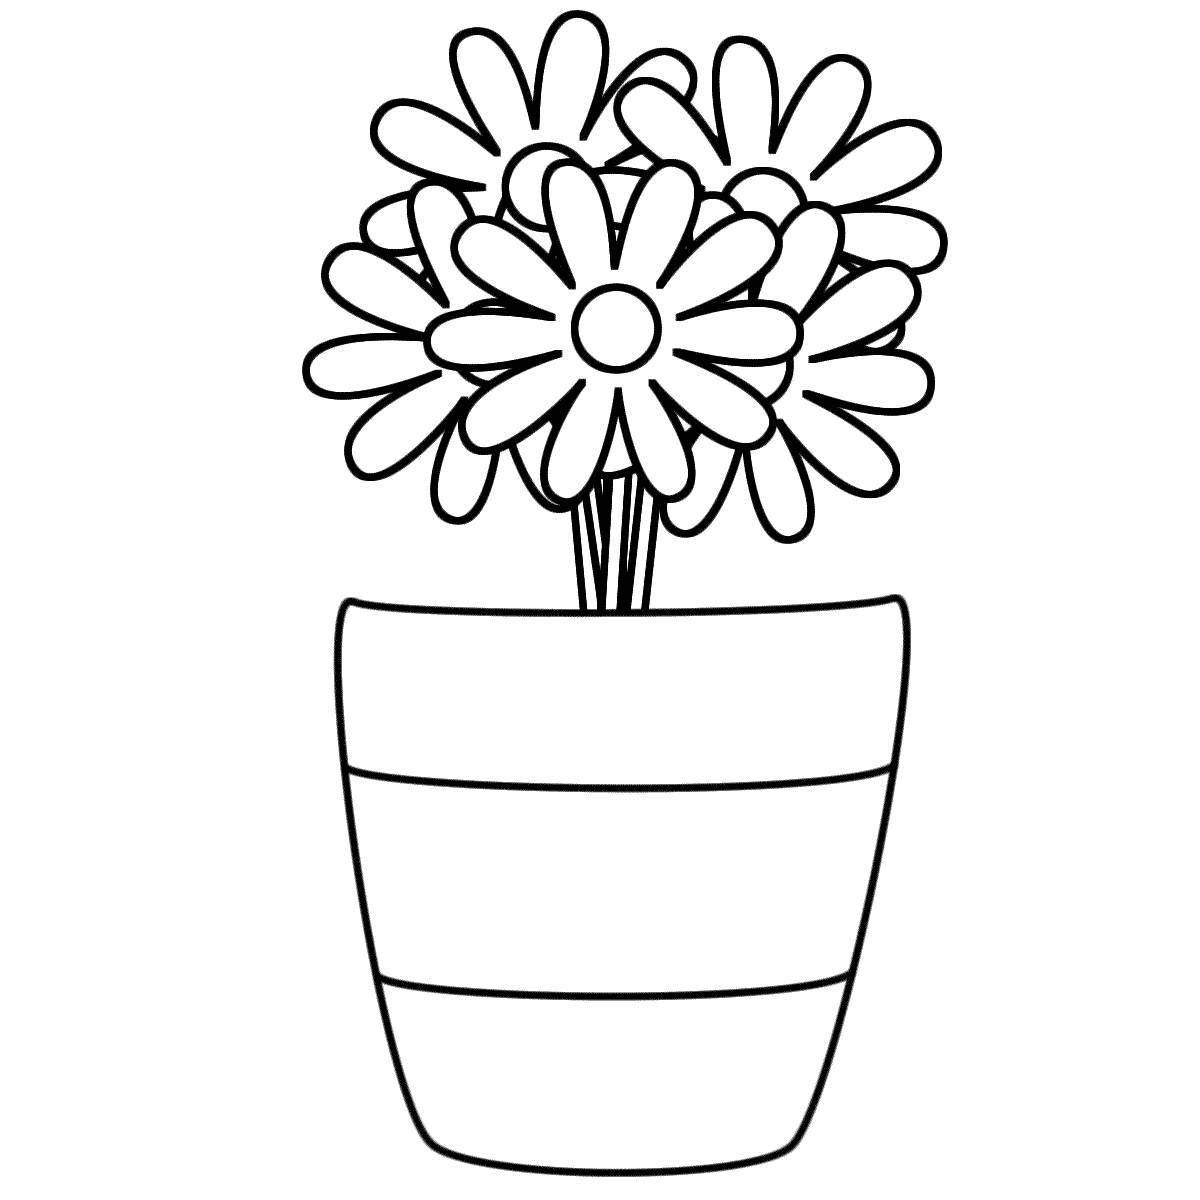 Shining coloring flowers in a vase for children